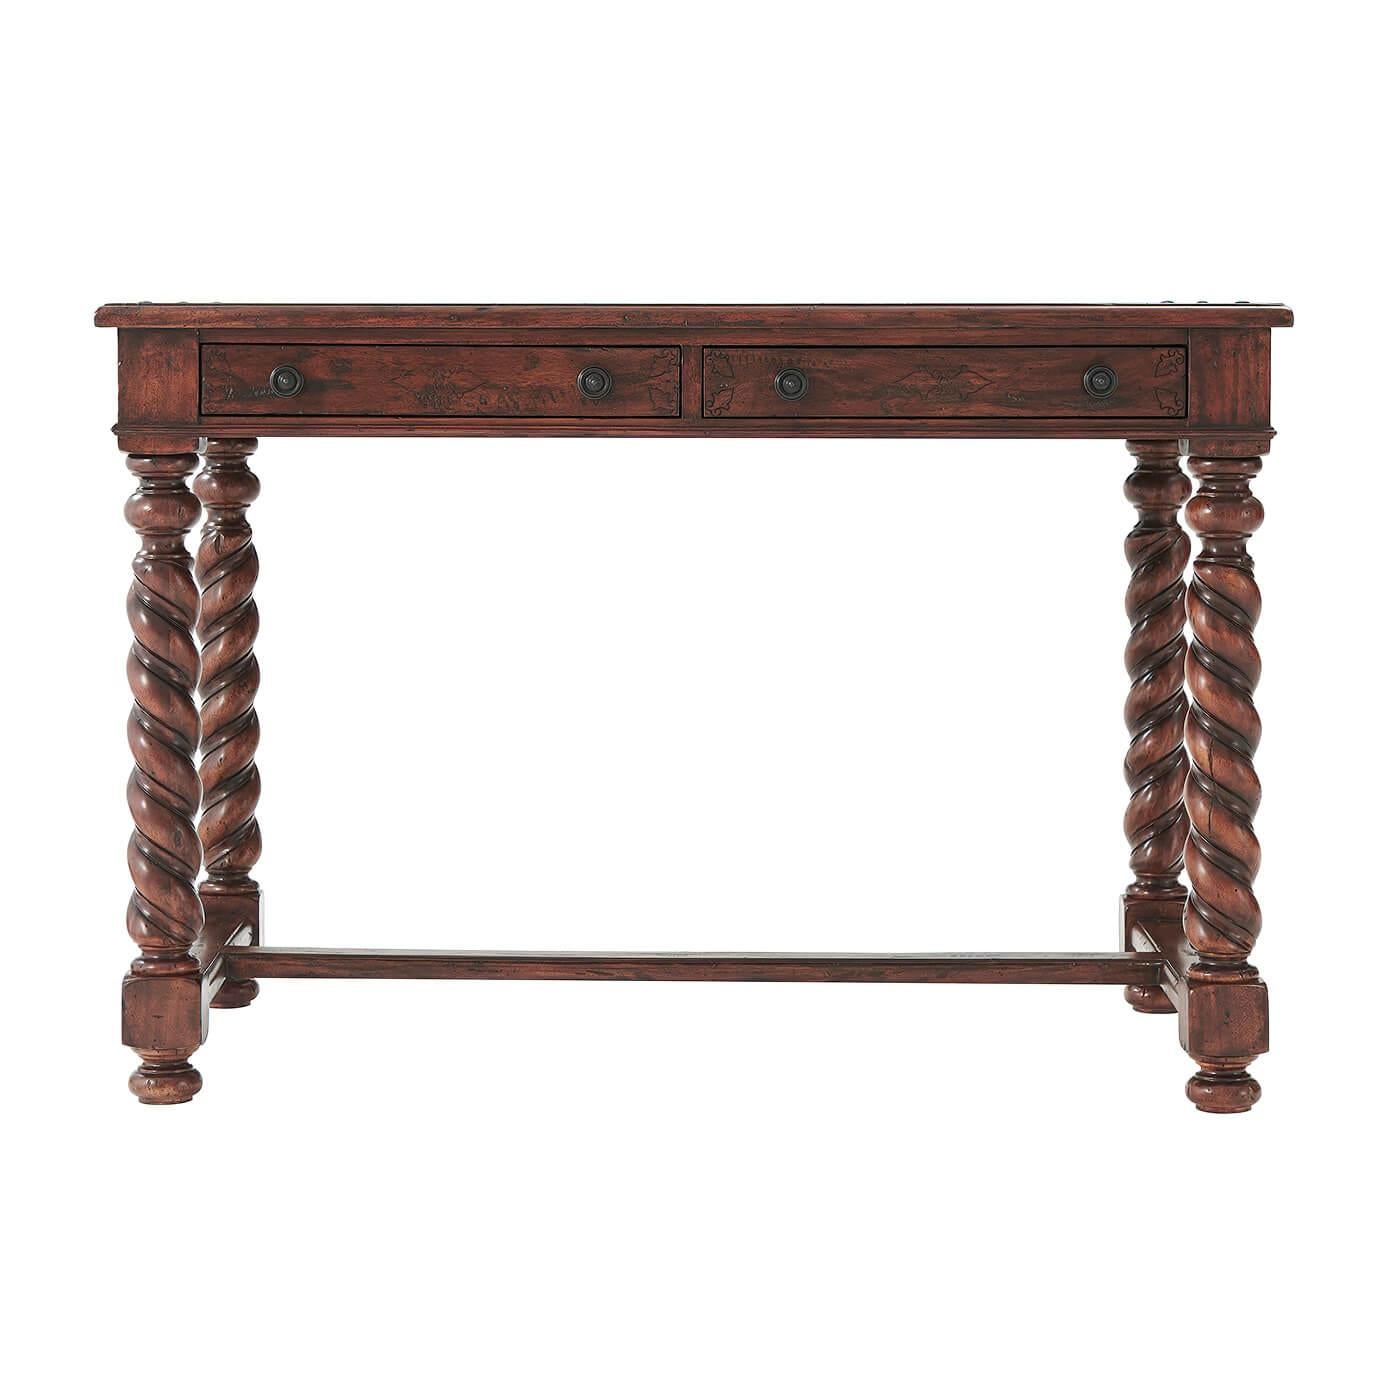 An antiqued wood writing desk, with two frieze drawers, on barley twist turned legs joined by stretchers. The original 17th century.

Dimensions: 44